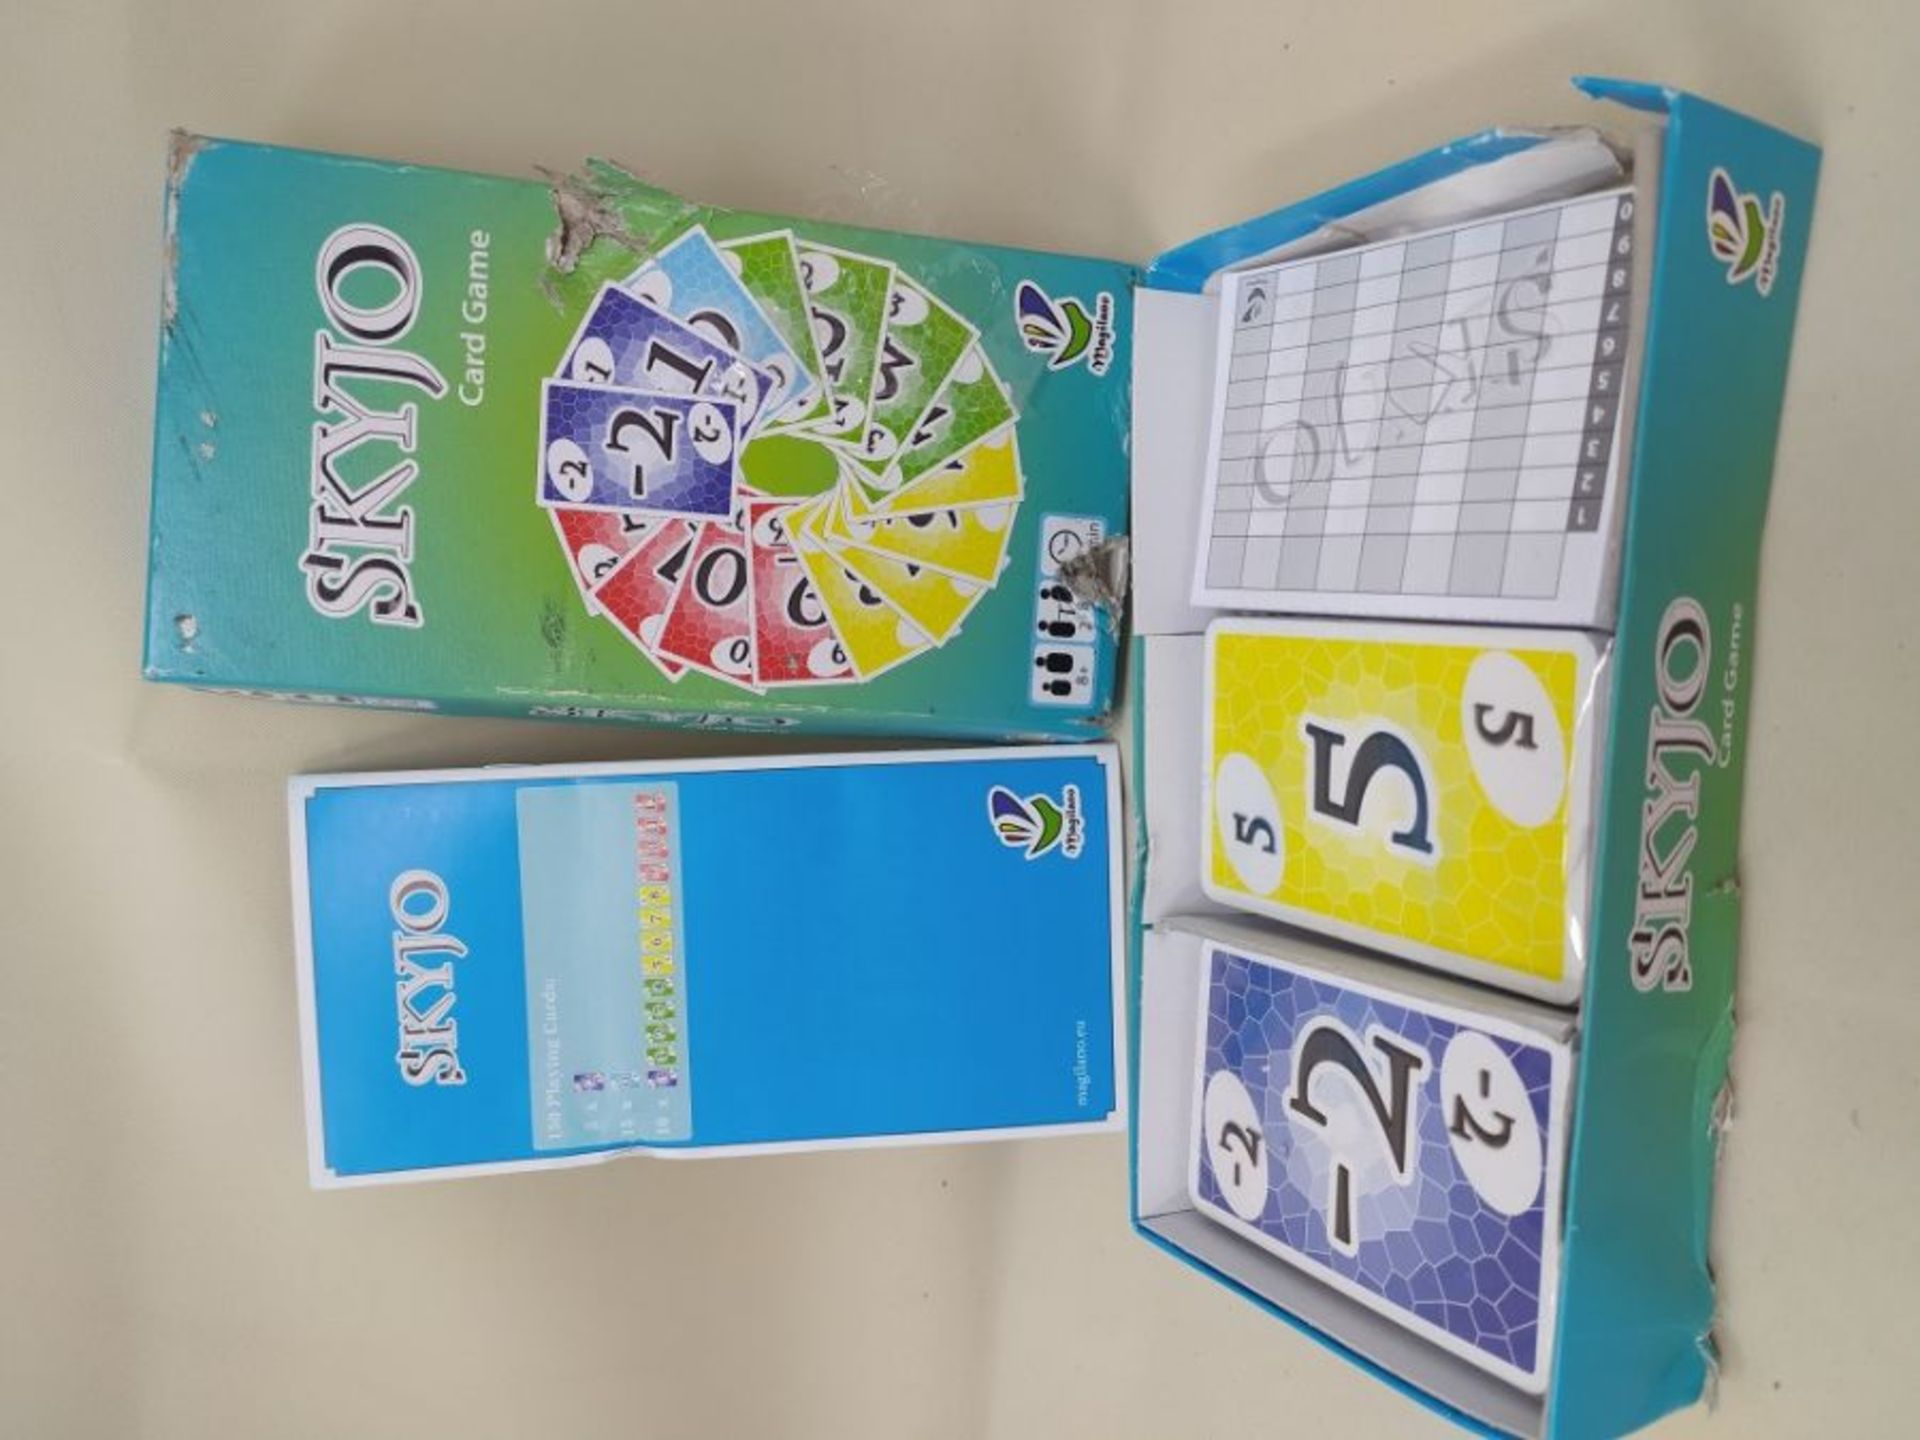 SKYJO by Magilano - The entertaining card game for kids and adults. The ideal game for - Image 2 of 2